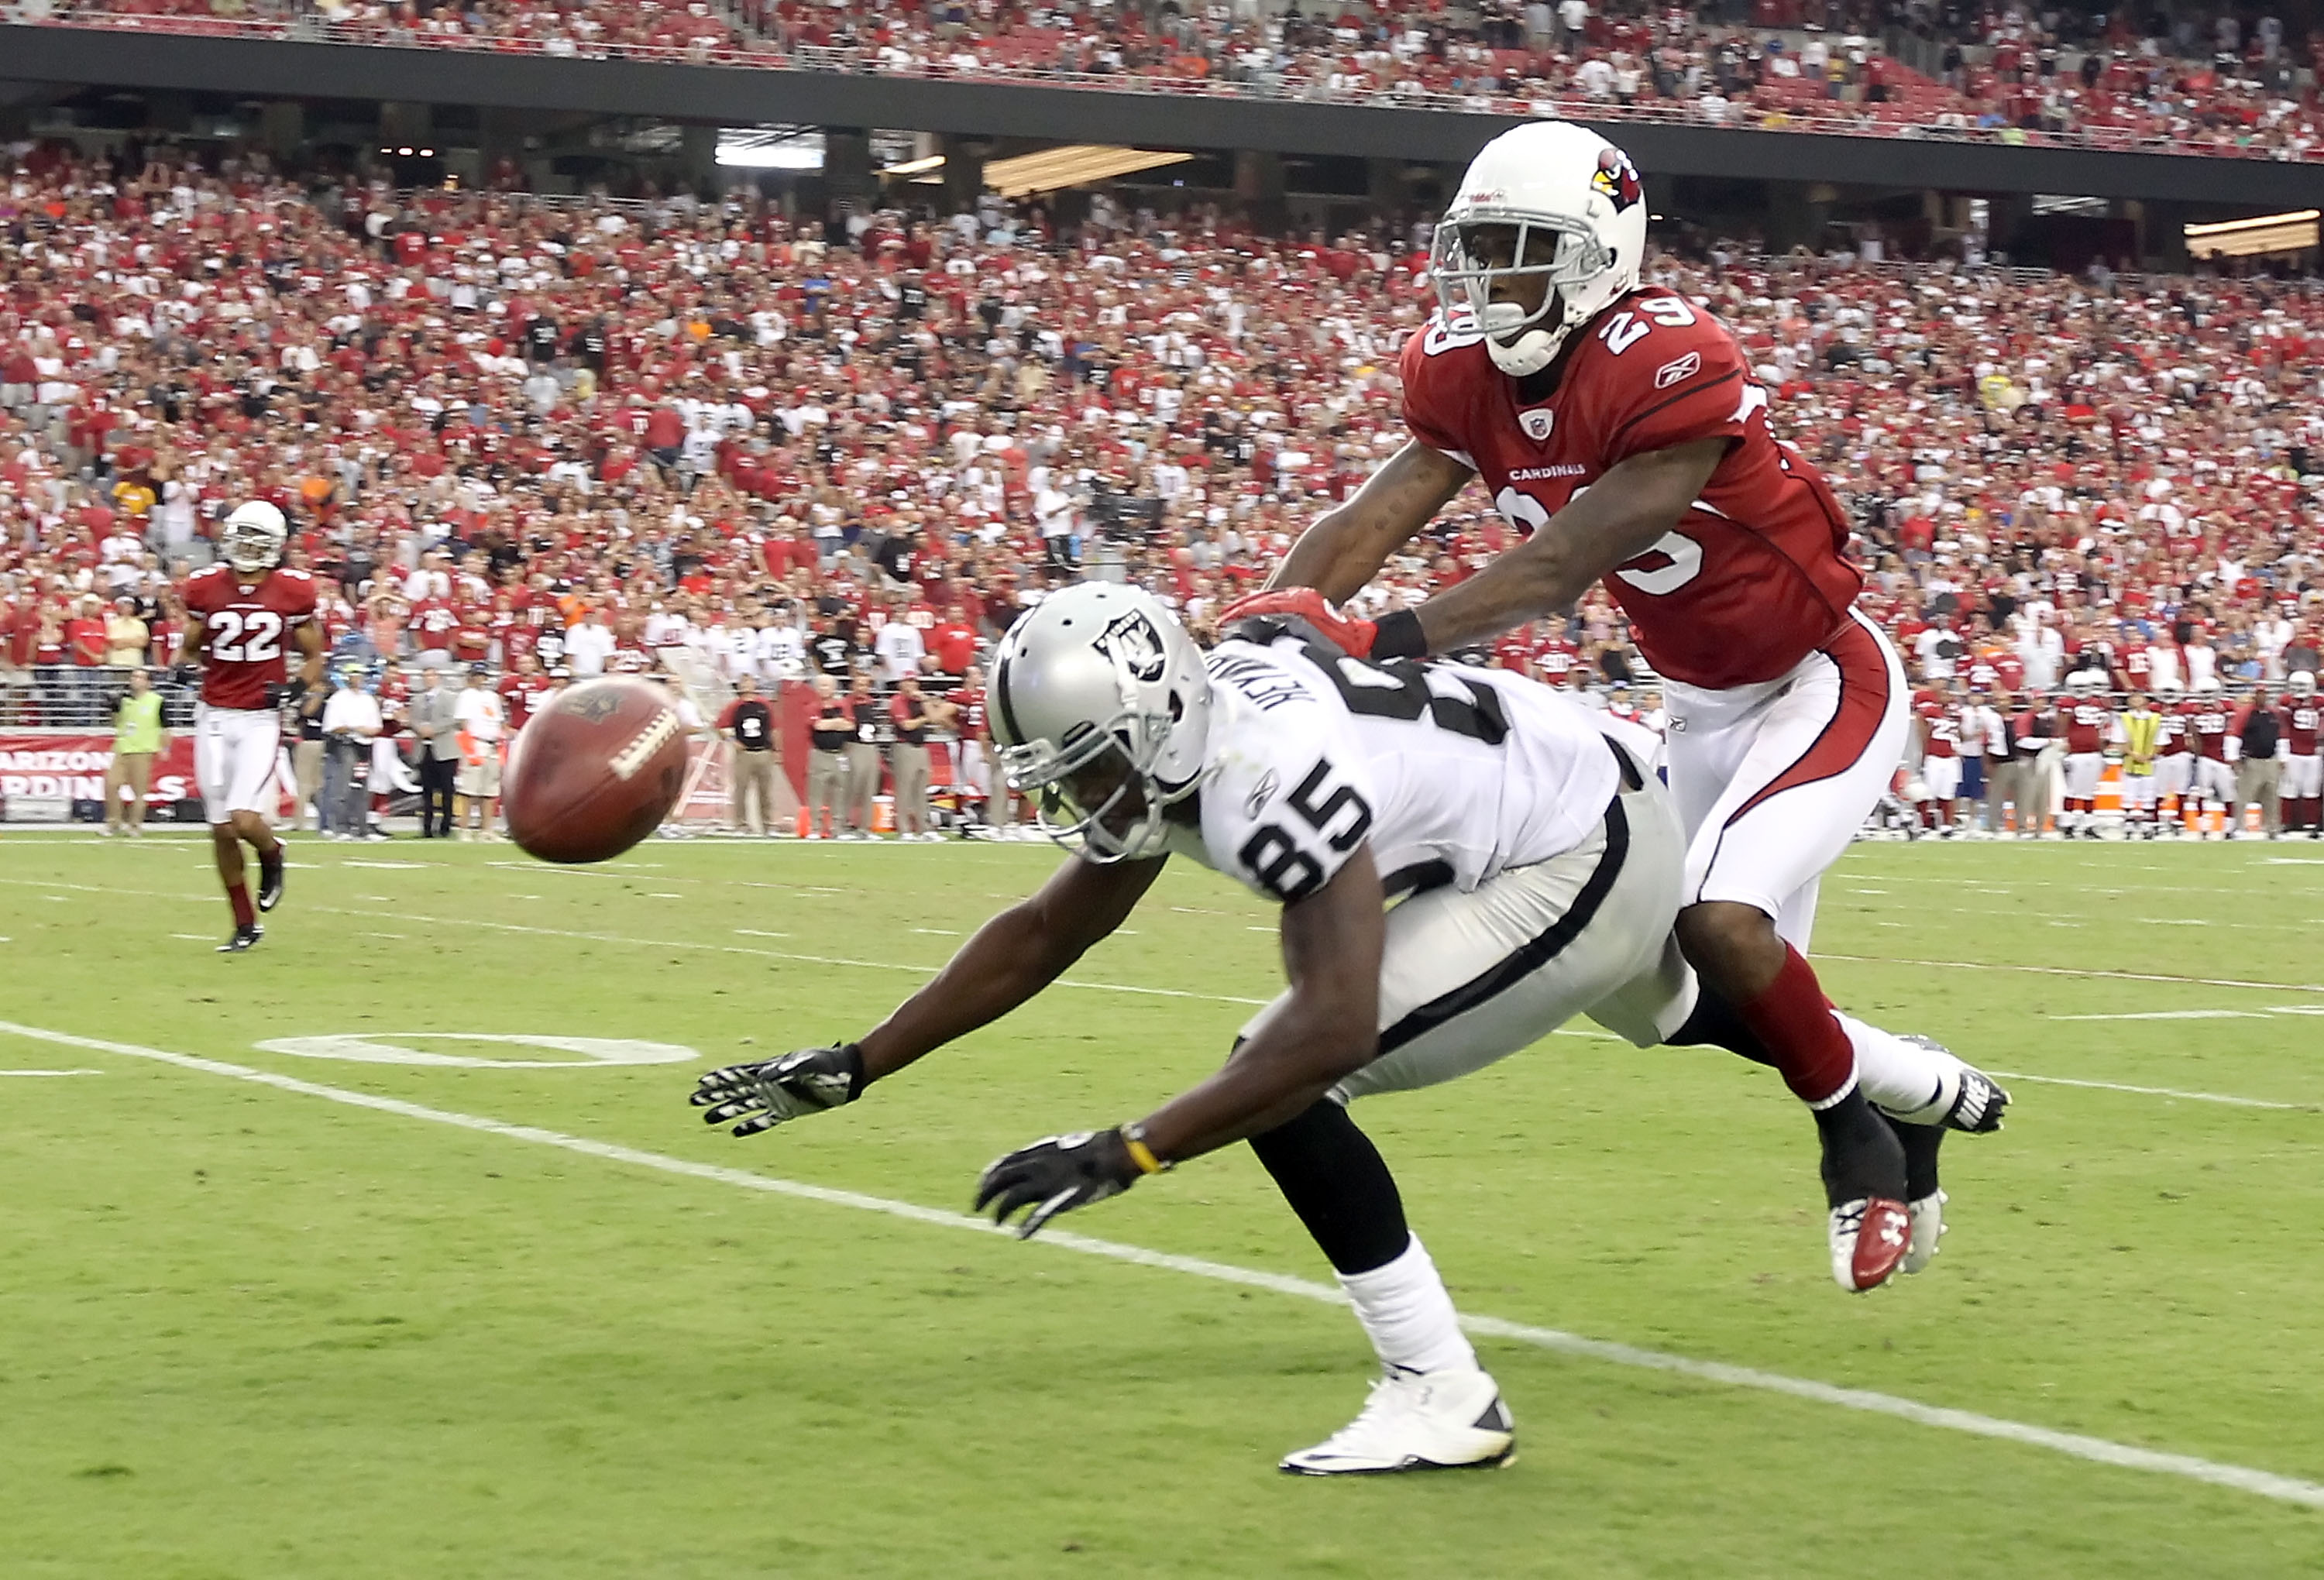 GLENDALE, AZ - SEPTEMBER 26:  Wide receiver Darrius Heyward-Bey #85 of the Oakland Raiders attempts to catch a pass while defended by Dominique Rodgers-Cromartie #29 of the Arizona Cardinals during the NFL game at the University of Phoenix Stadium on Sept